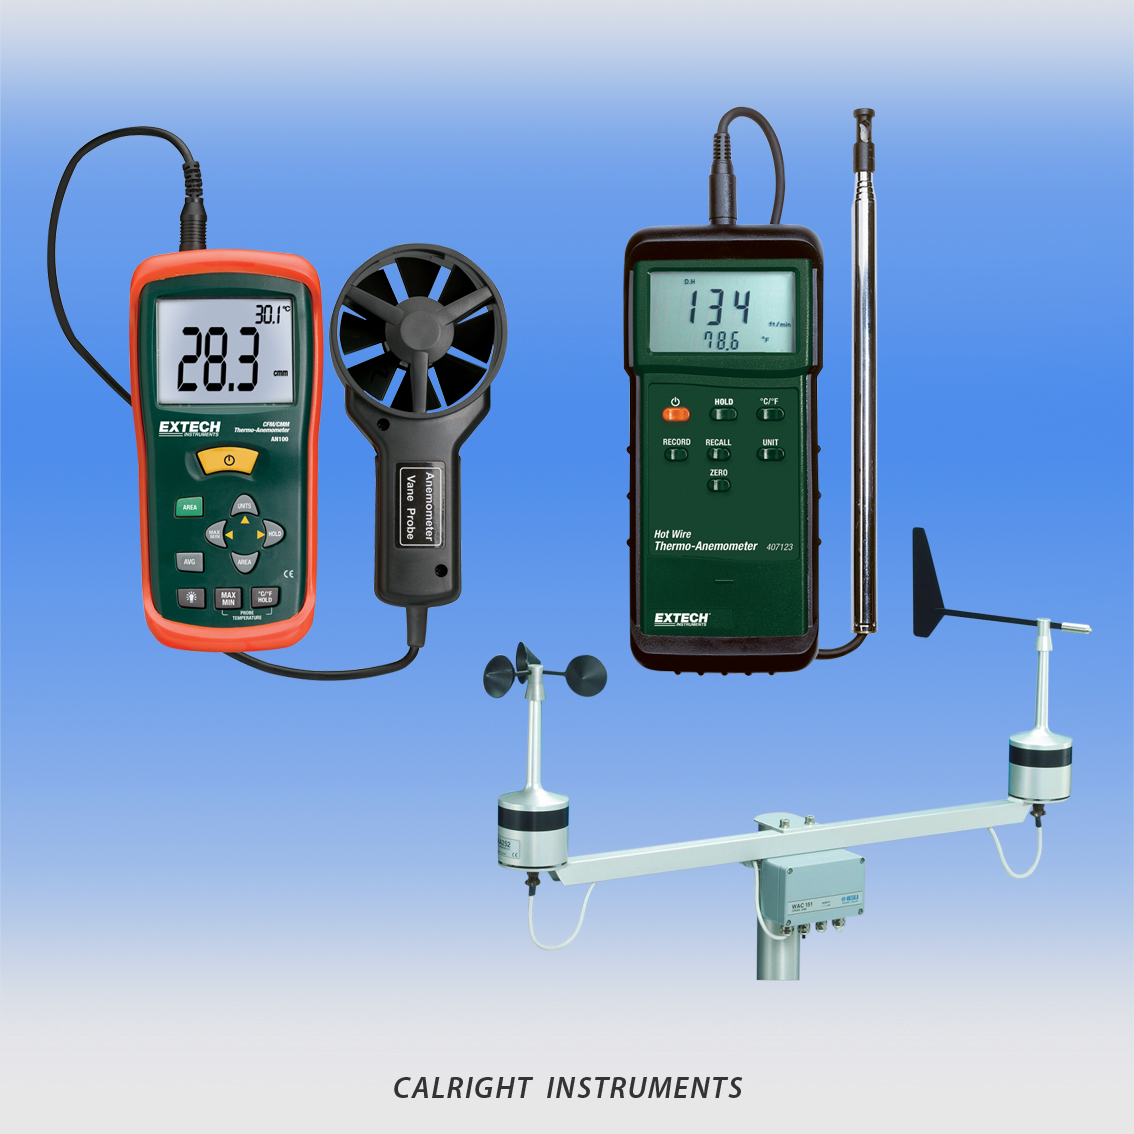 Buy Anemometers For Air Flow Measurement Online Calright Instruments